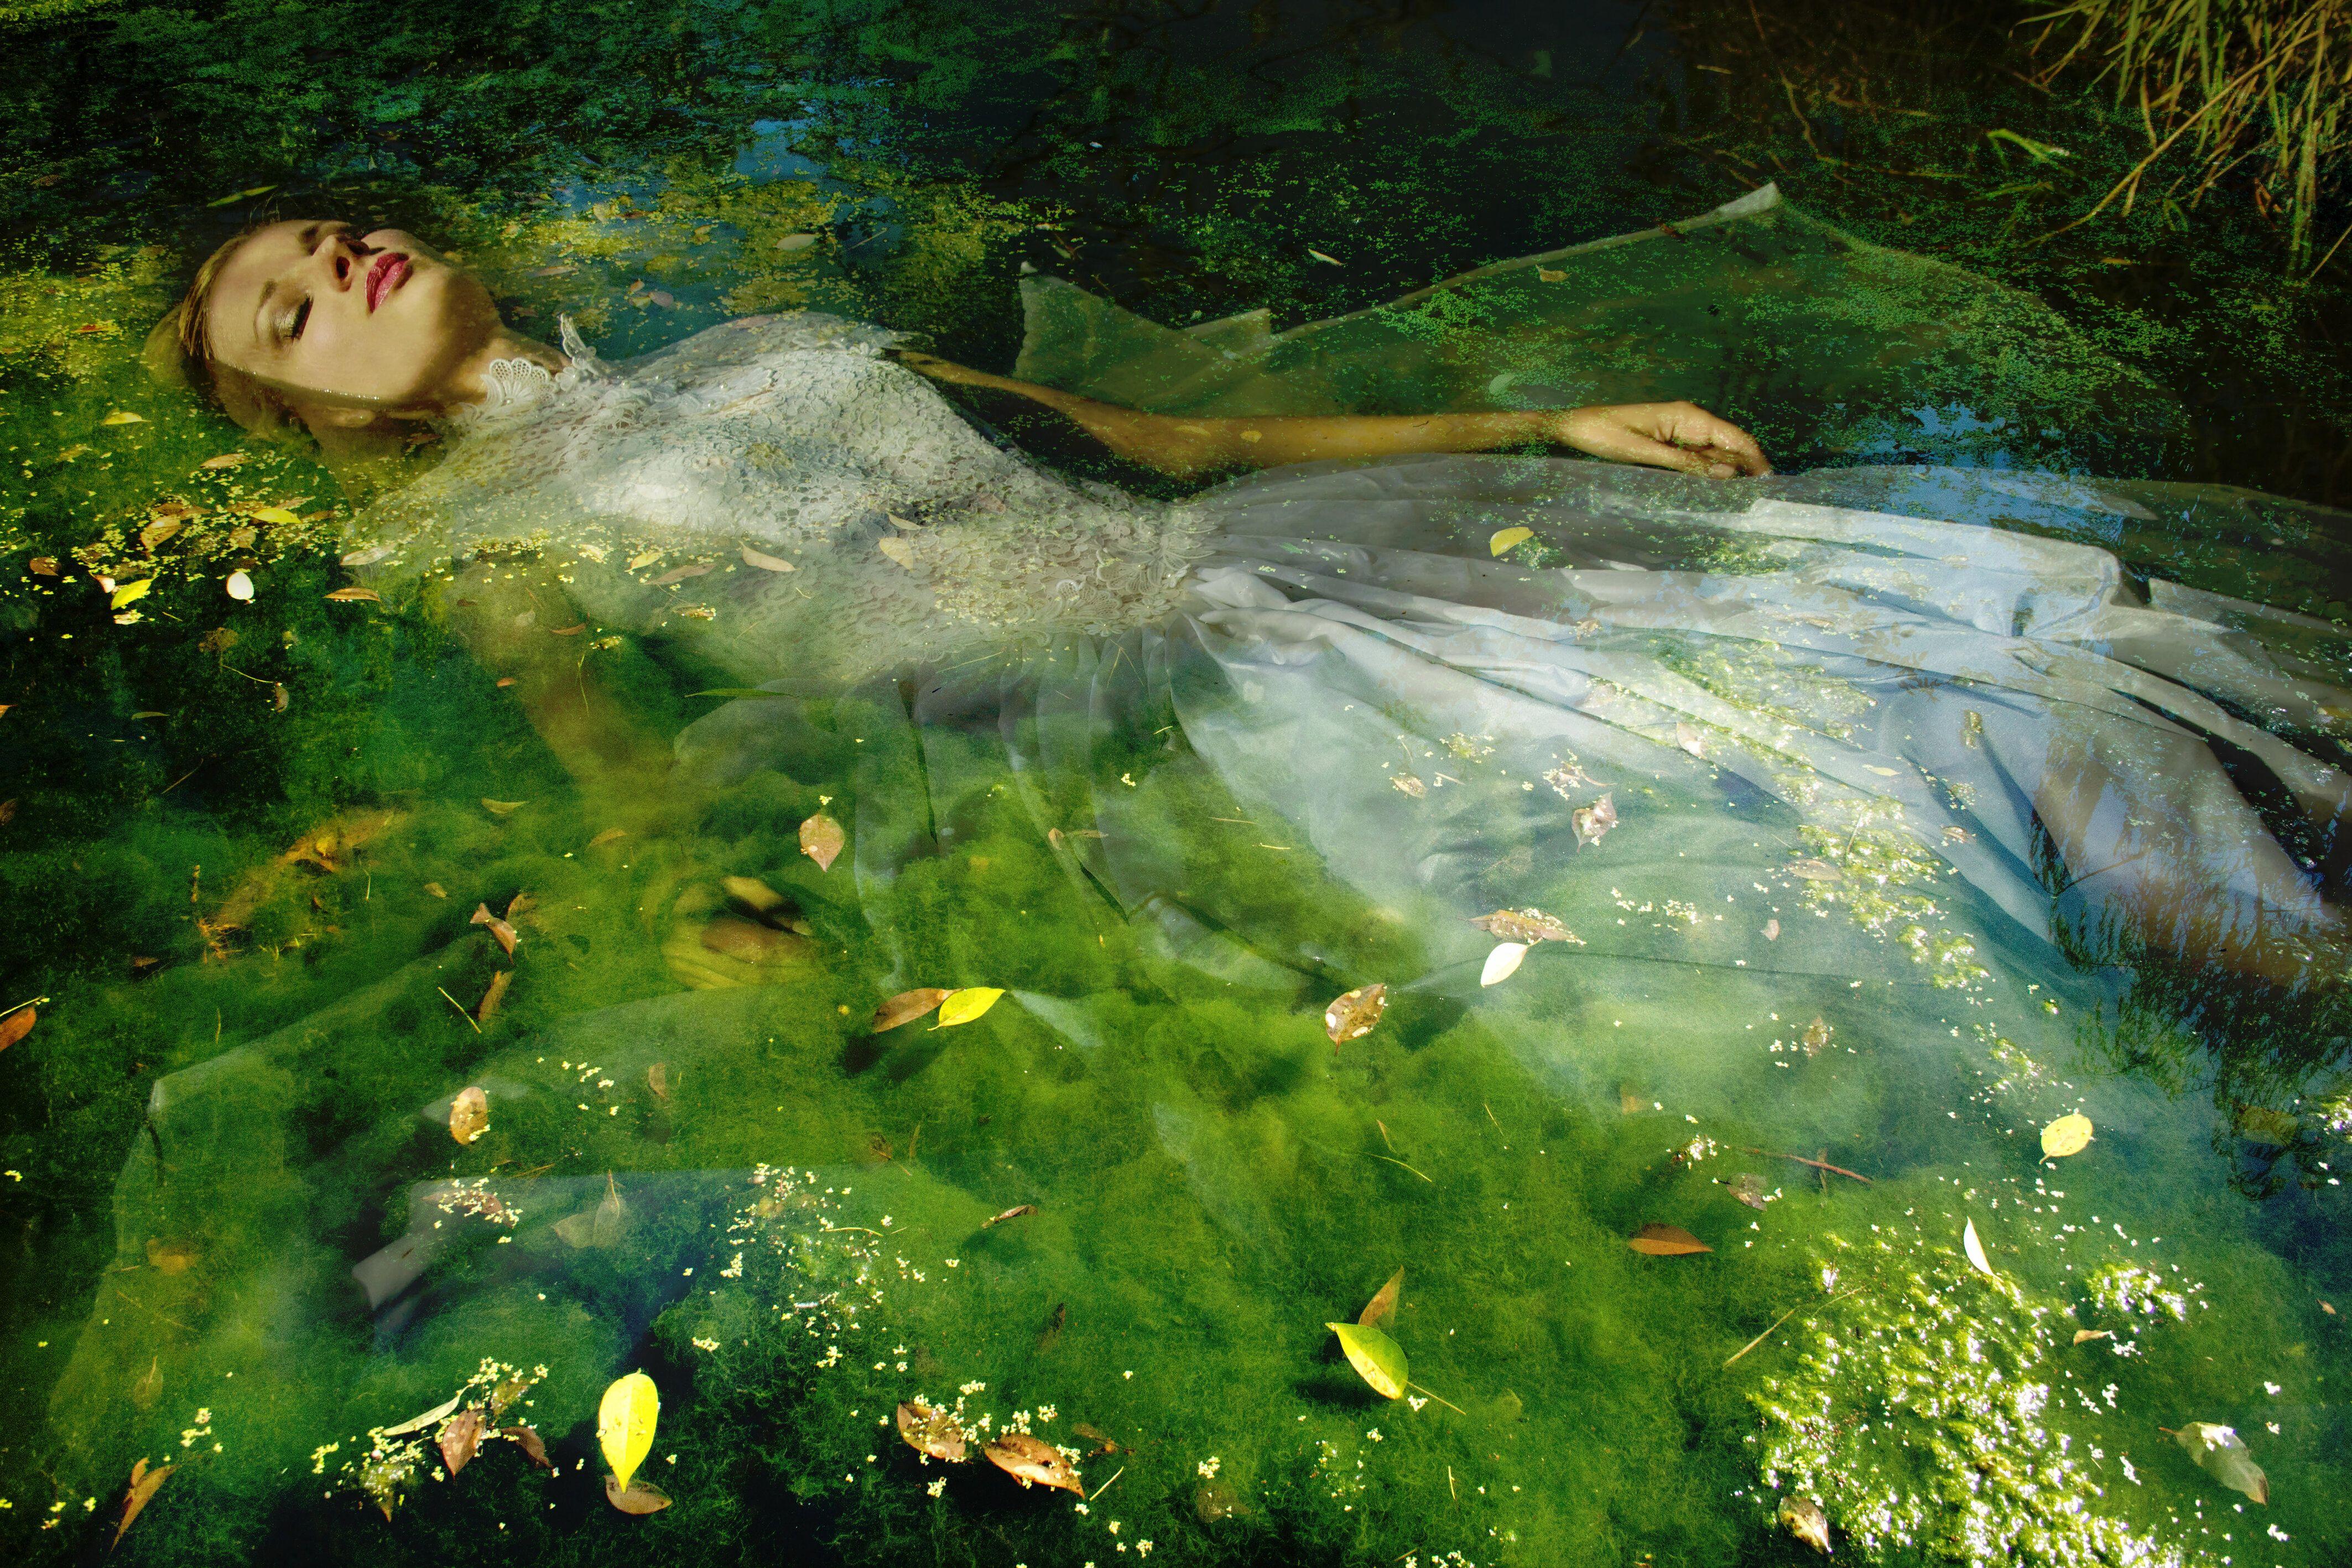 Viet Ha Tran Color Photograph - (MUSEUM EDITION) Take me to your dreams Ophelia IV, Photograph, Archival Ink Jet